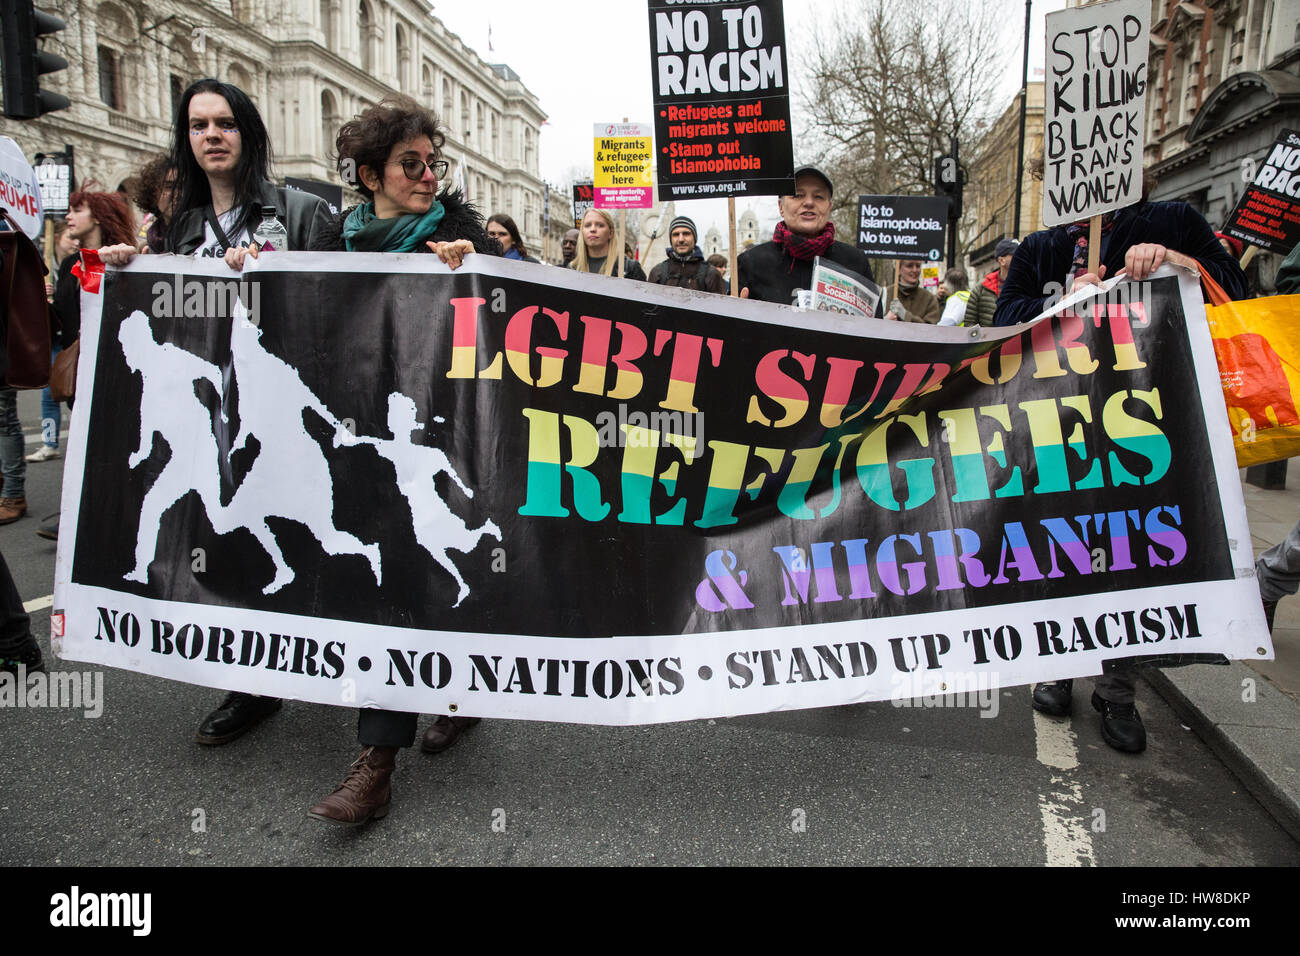 London, UK. 18th March, 2017. Thousands of demonstrators representing many different anti-racist groups take part in the March Against Racism through the centre of London. The march was timed to take place as close as possible to the UN International Day for the Elimination of Racial Discrimination. Credit: Mark Kerrison/Alamy Live News Stock Photo